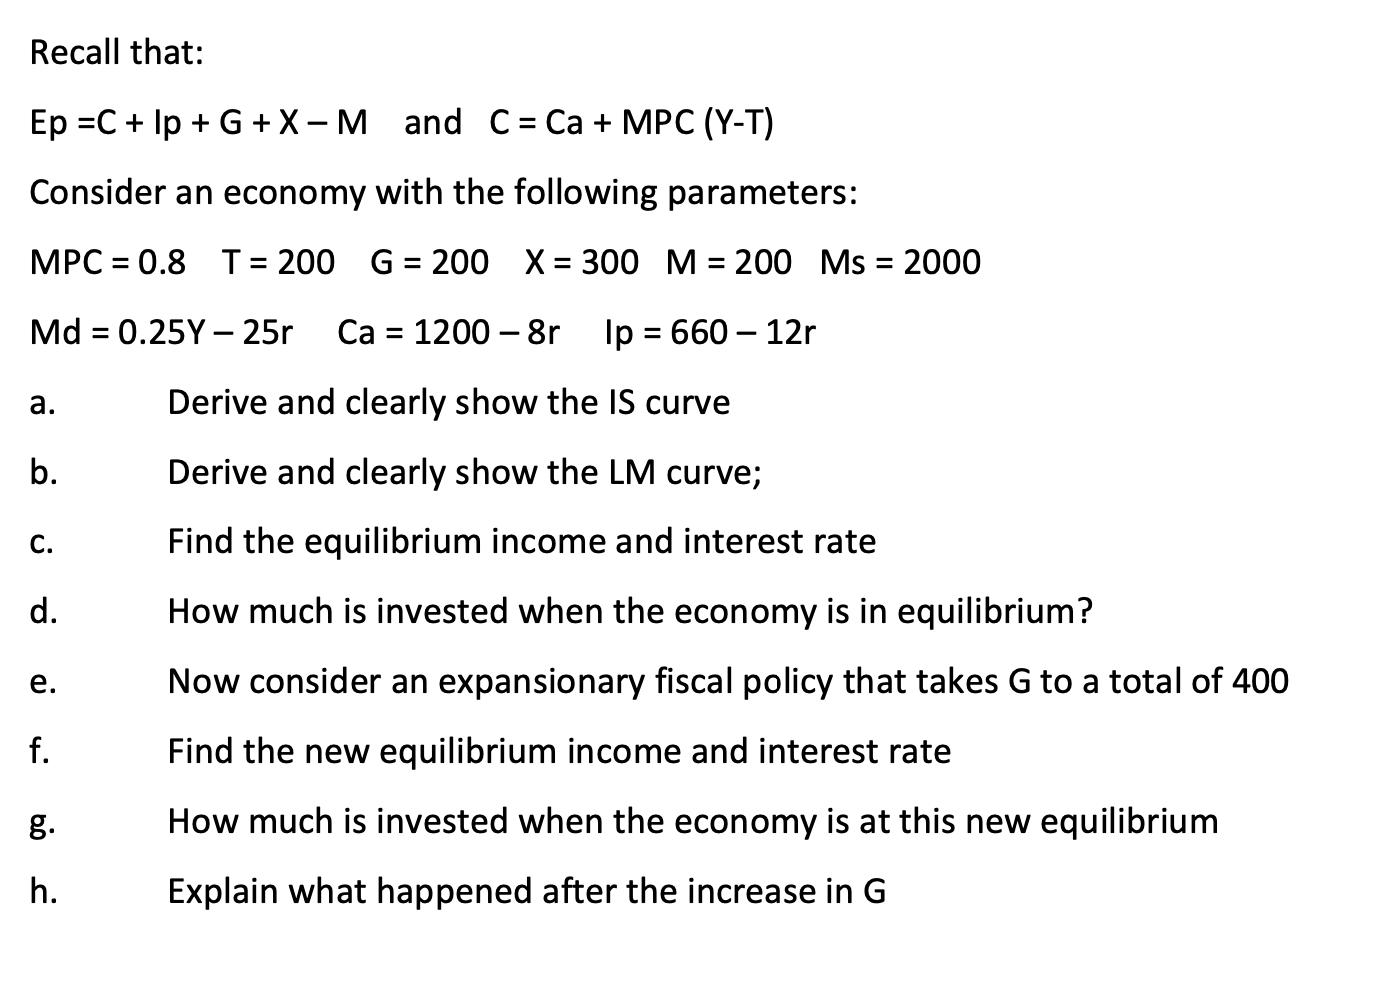 Recall that: \( E p=C+I p+G+X-M \) and \( C=C a+M P C(Y-T) \) Consider an economy with the following parameters: MPC \( =0.8